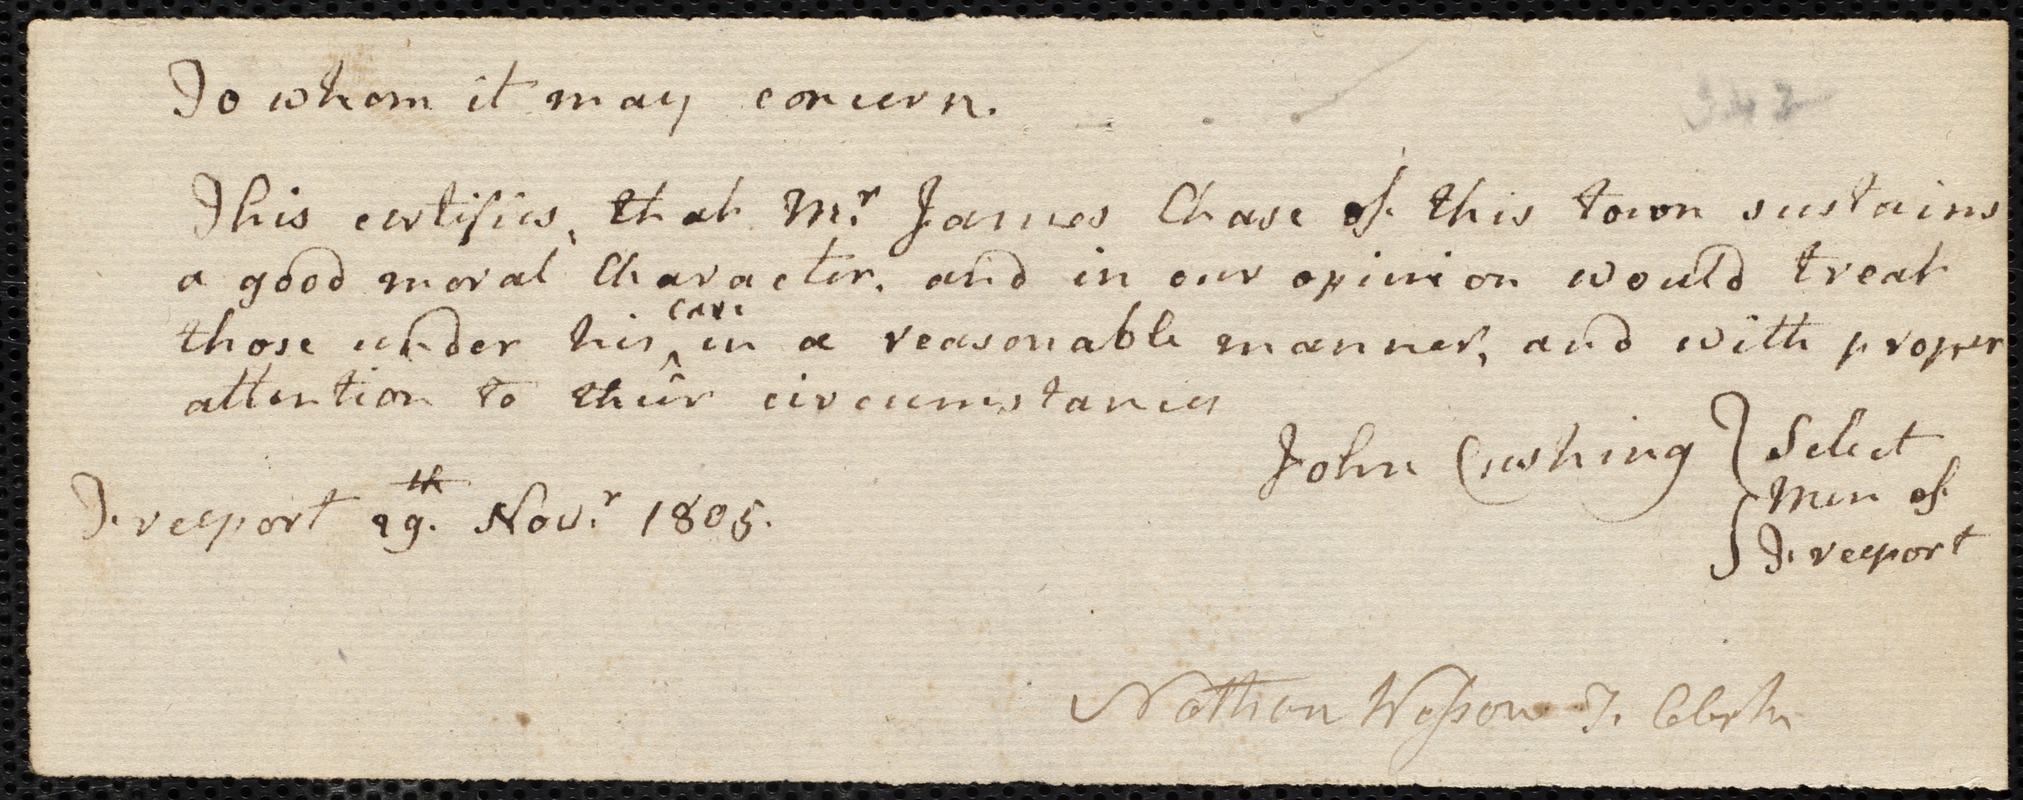 Jabez Barrow indentured to apprentice with James Chase of Freeport, 13 December 1805